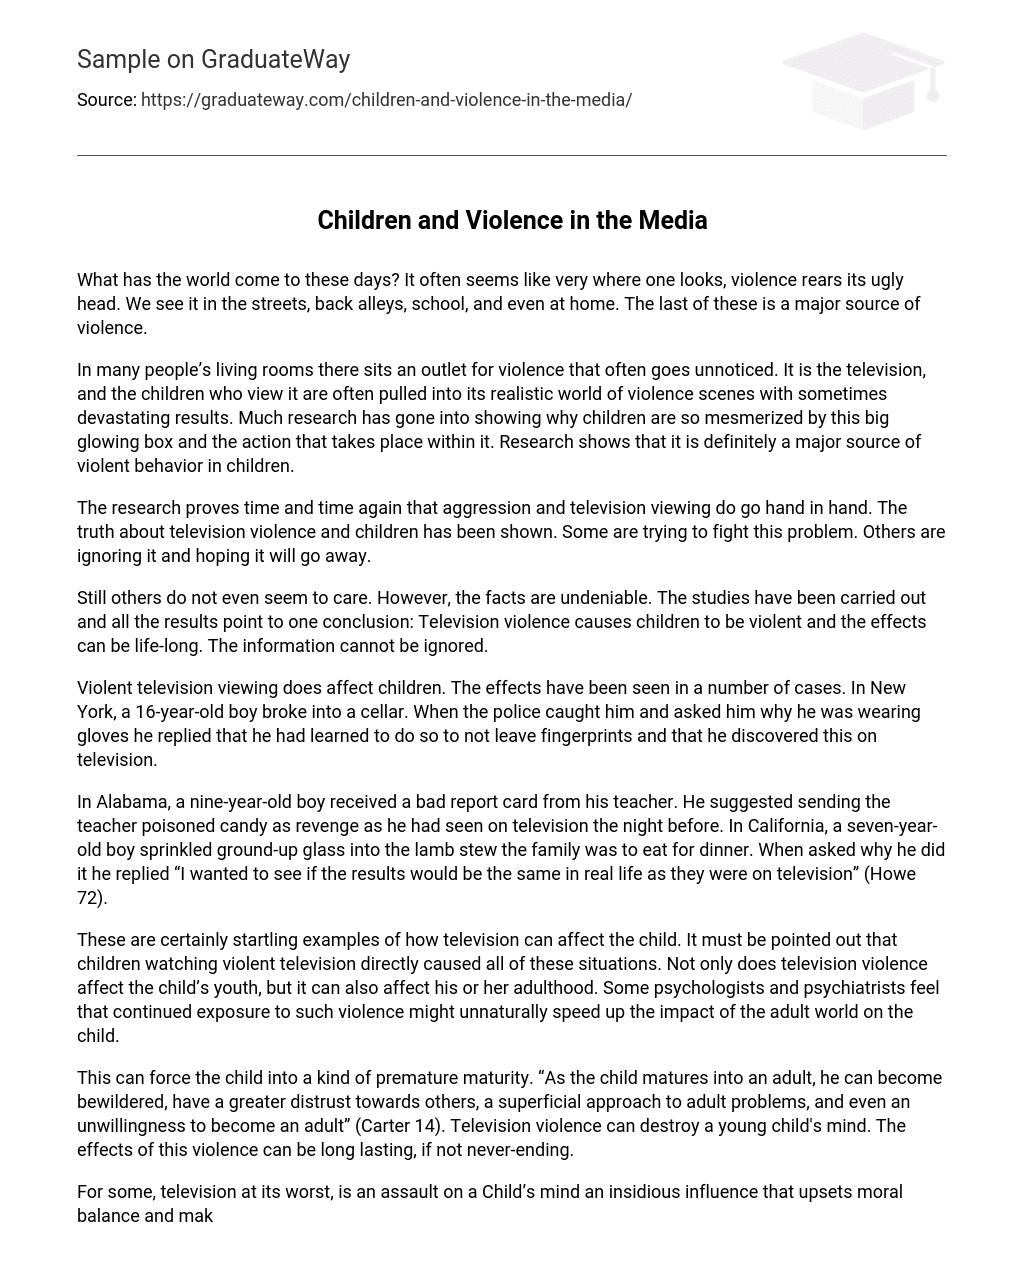 Children and Violence in the Media